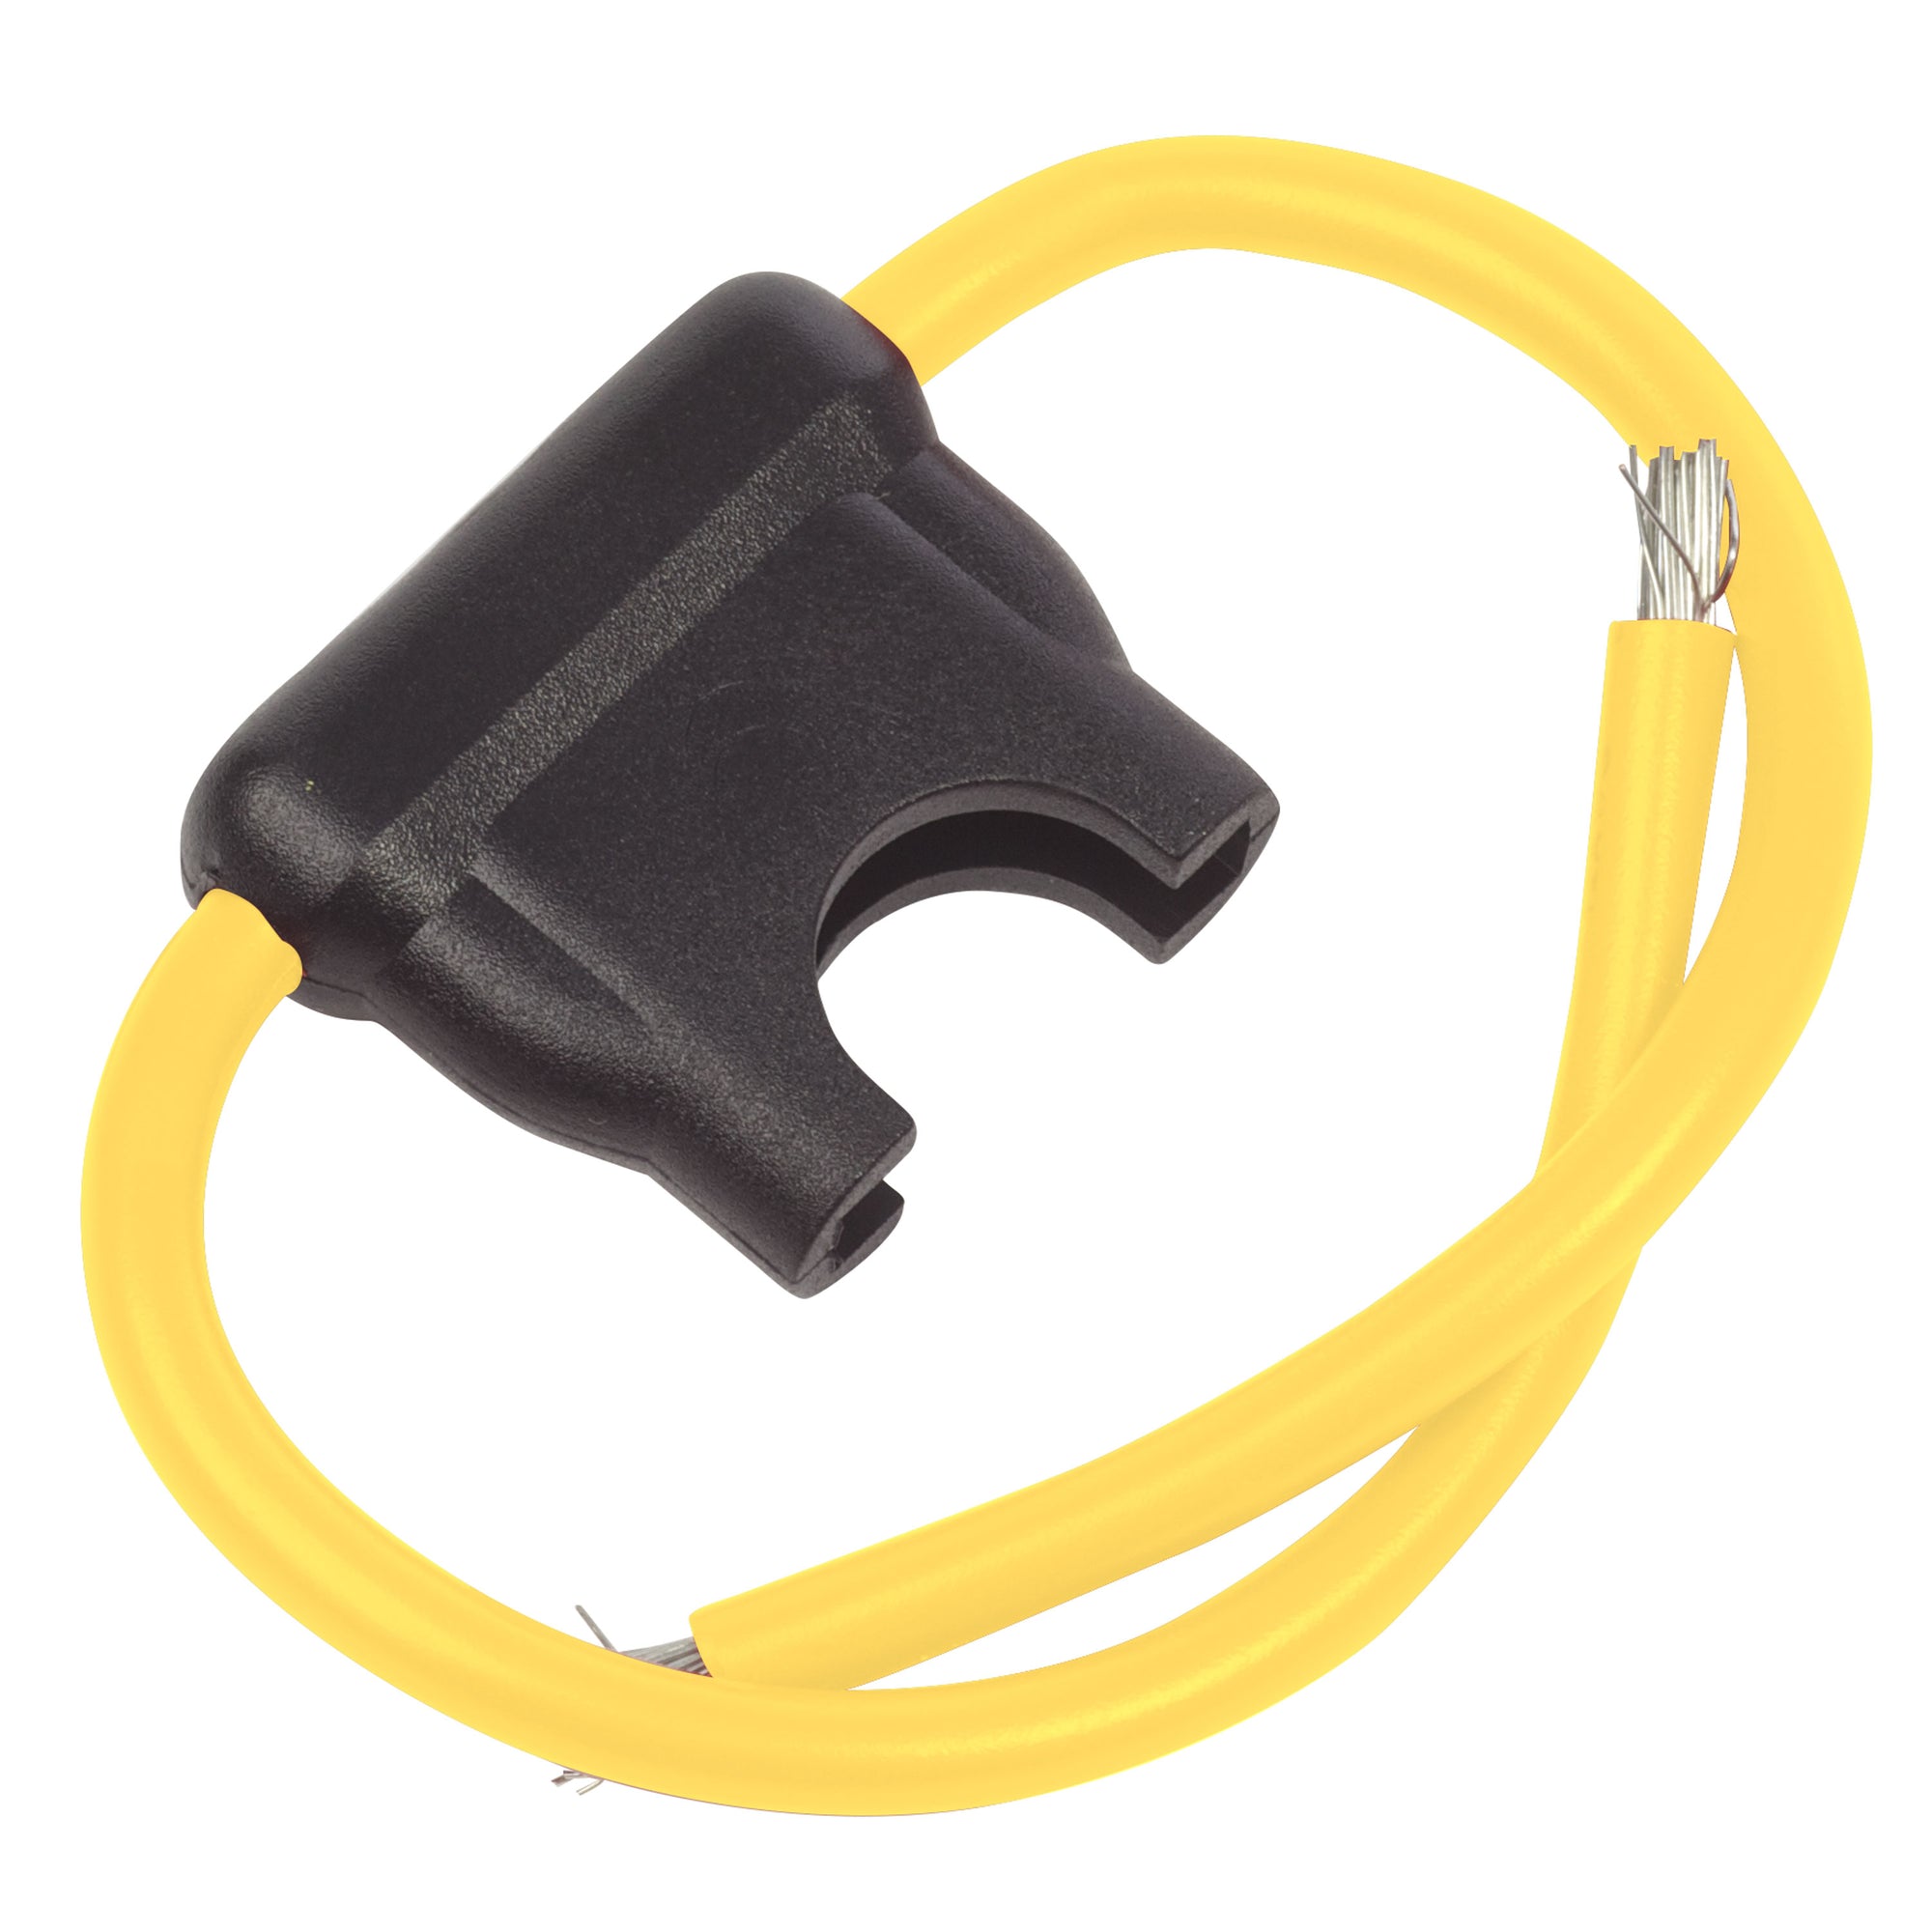 Bussmann BP/HHD-RP HHD ATC Fuse Holder with #12 Yellow Leadwire - Black, 30 Amps, Blister Pack